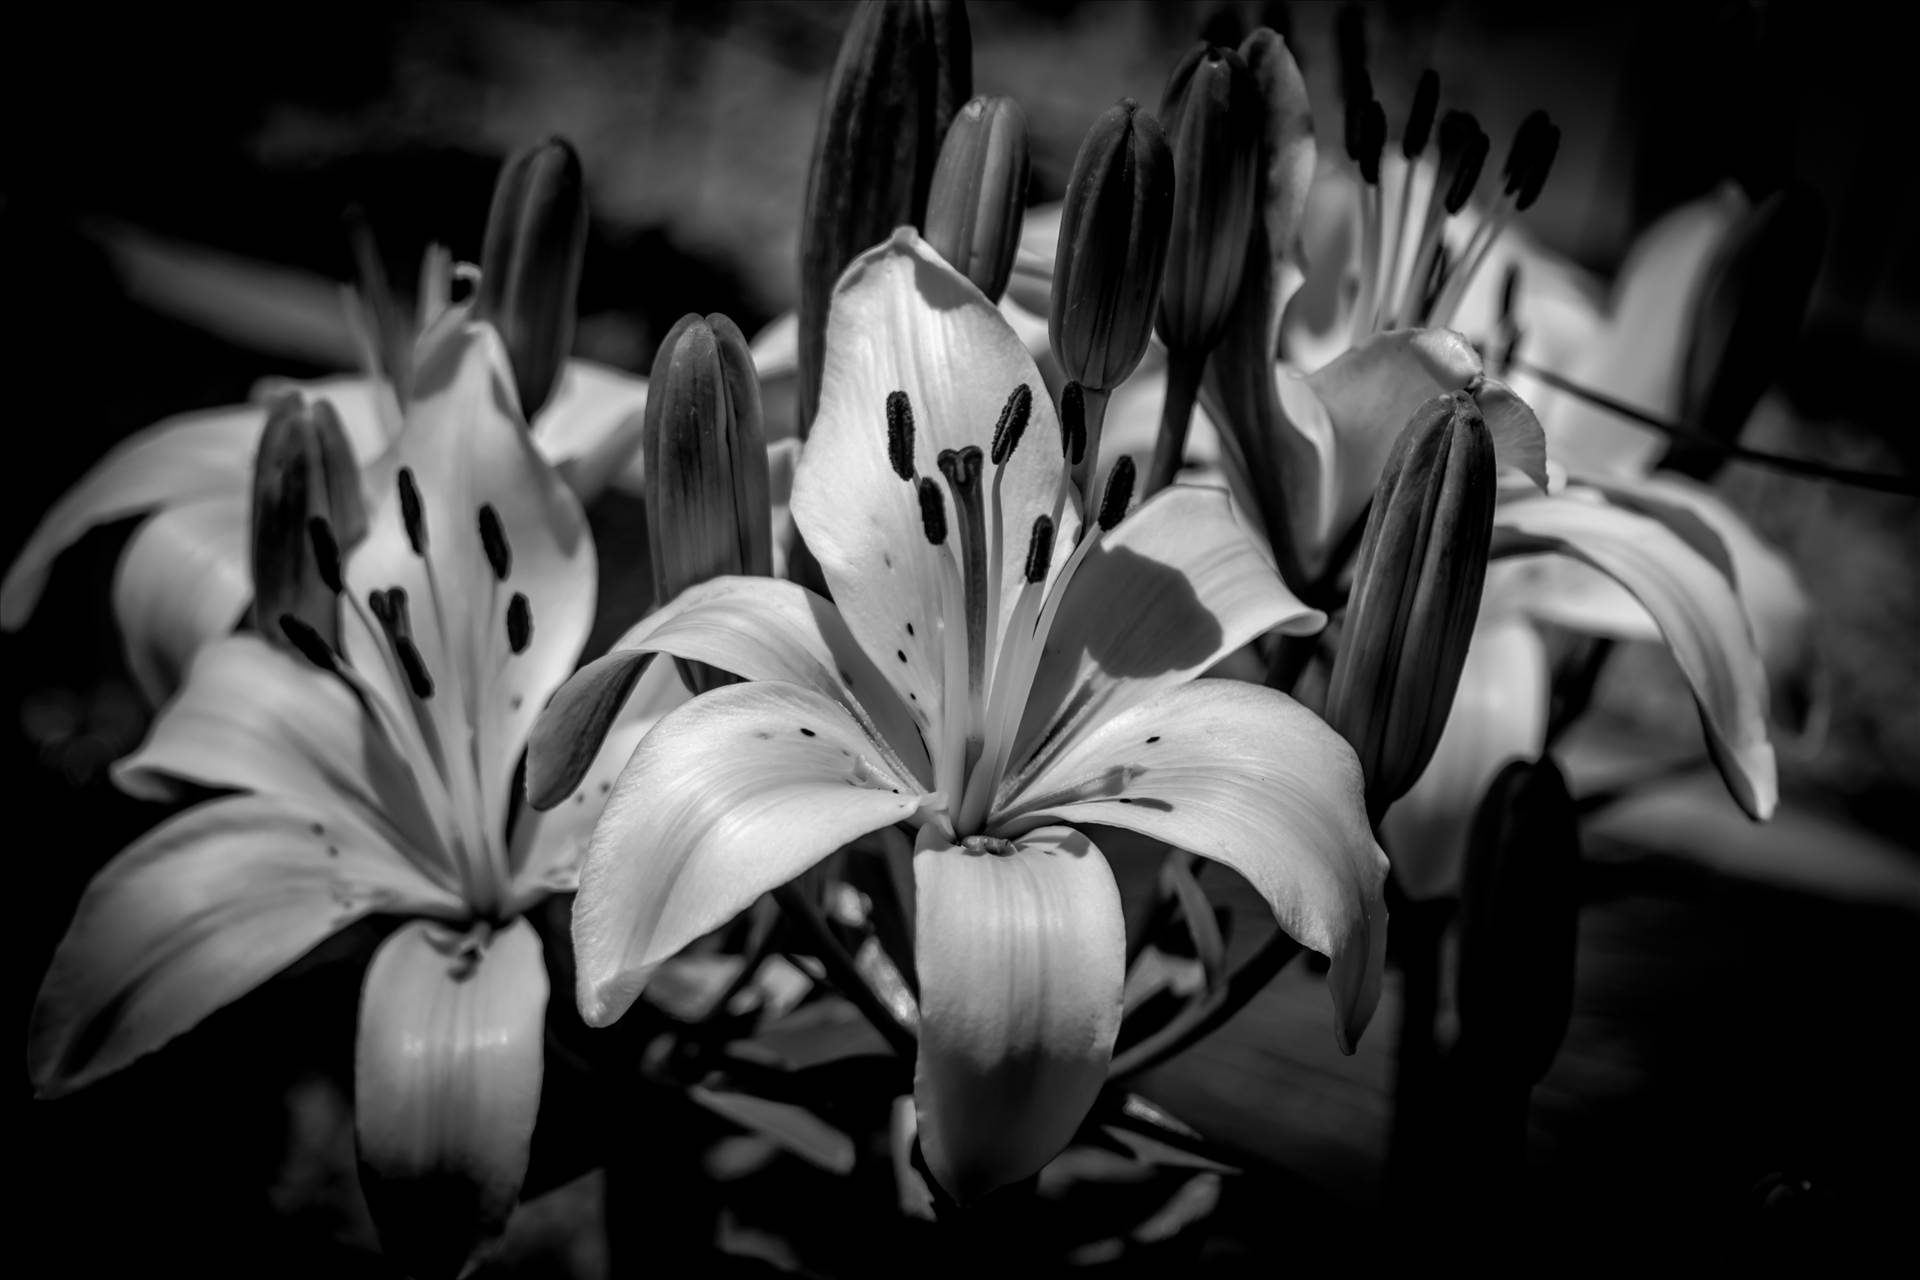 B&W Lilies from the Garden.jpg Lilies in the Garden - Black and White by Dennis Rose